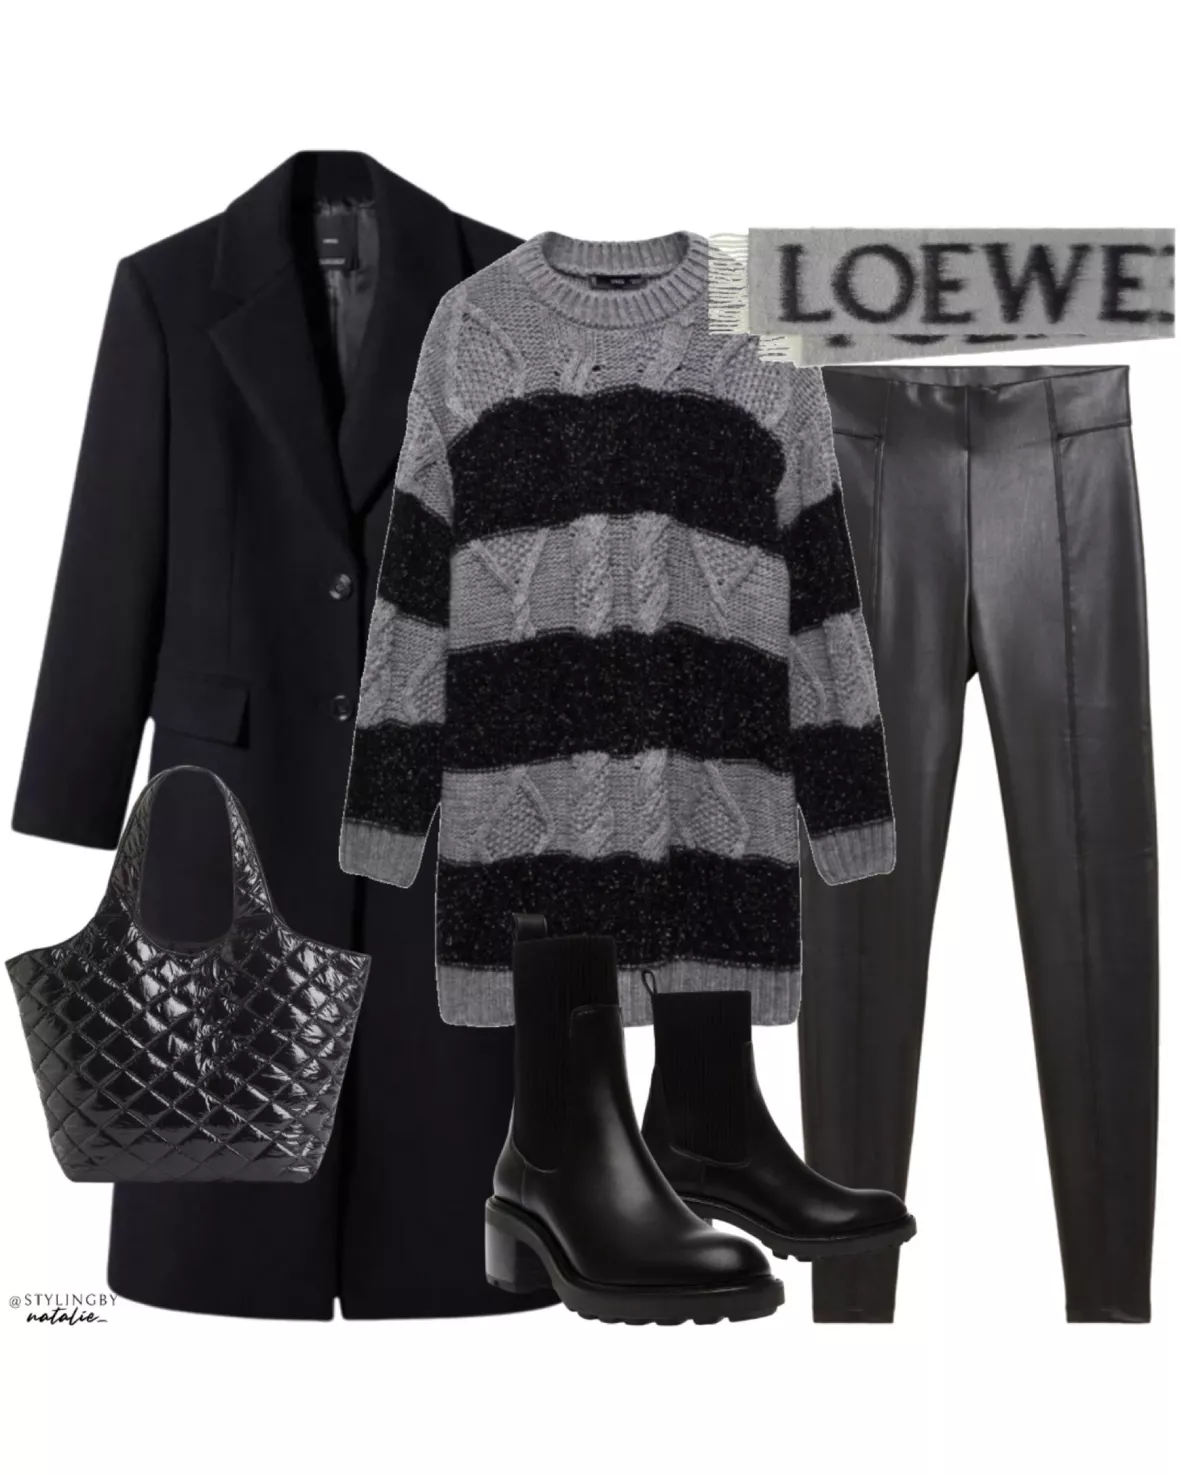 Black Wool Tights with Grey Knit Sweater Dress Outfits (2 ideas